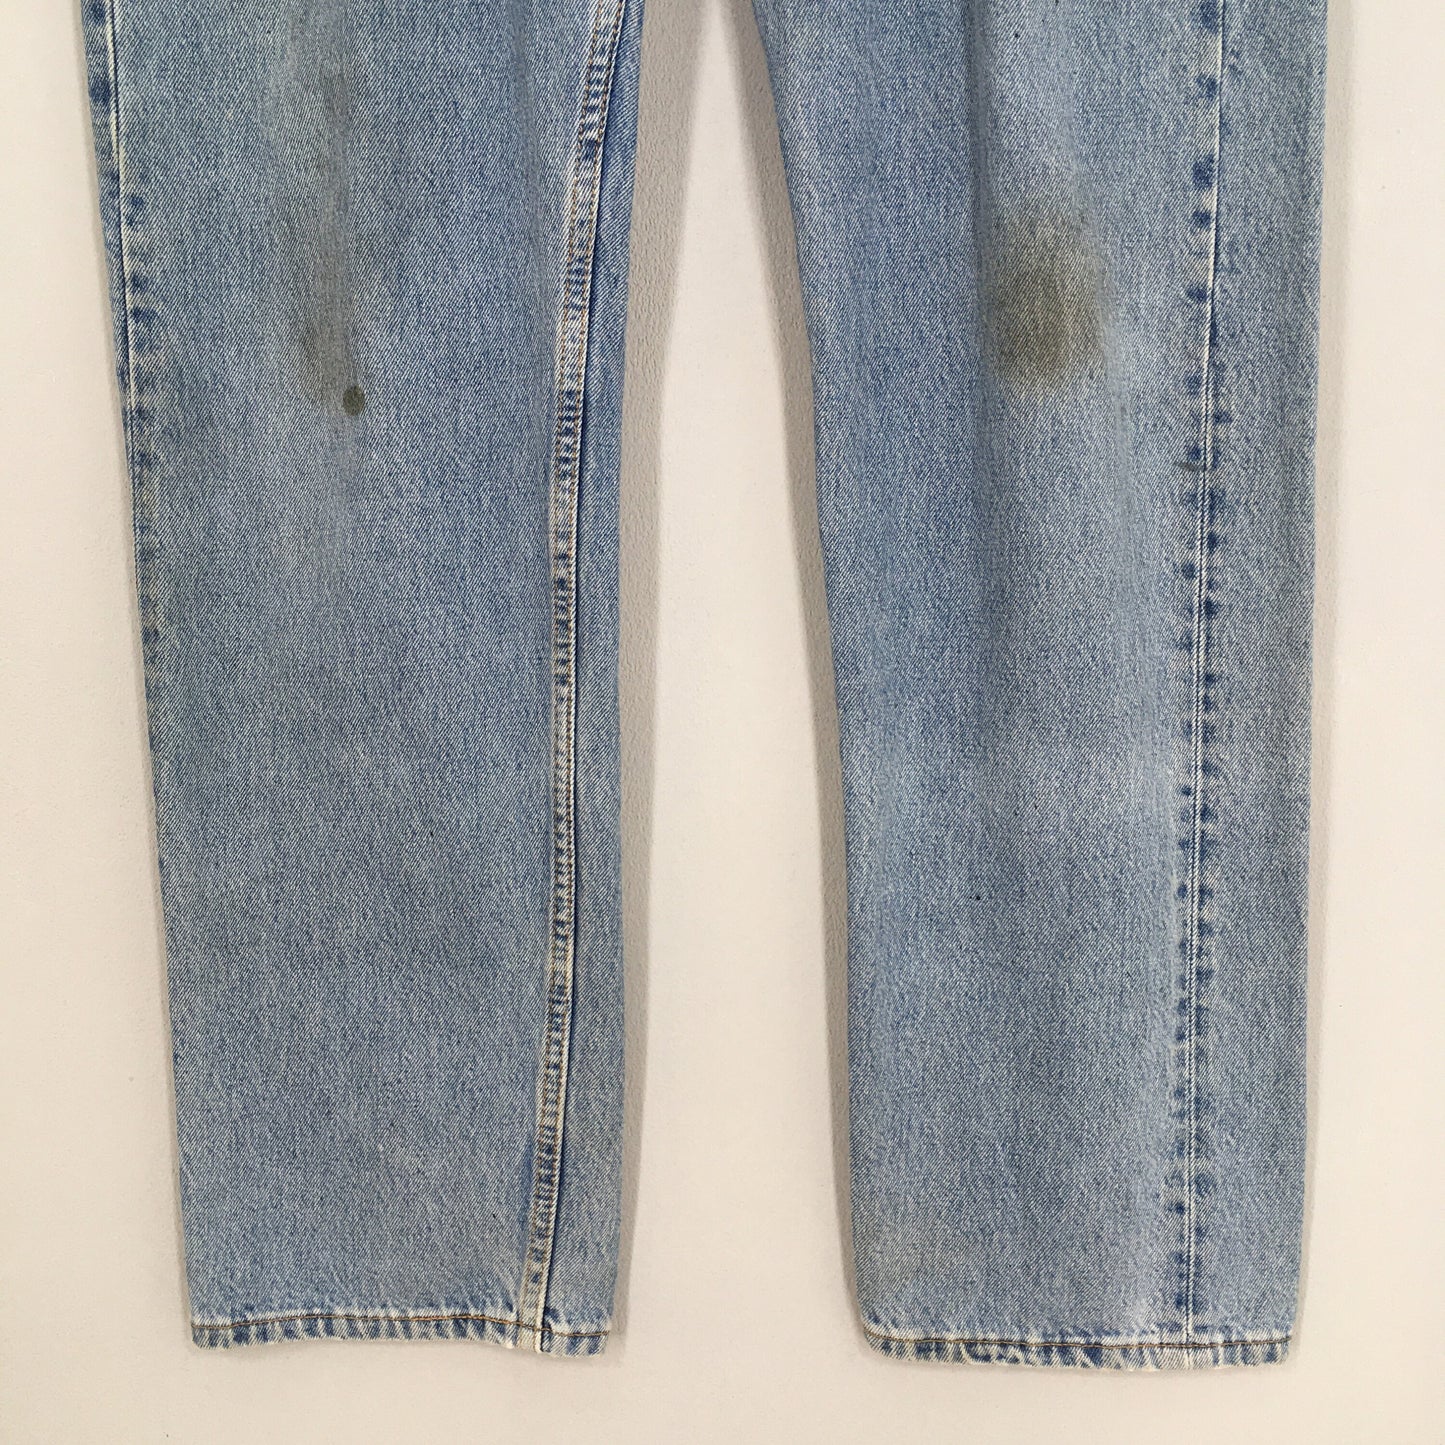 Levi's 501 Faded Dirty Light Wash Jeans Size 34x31